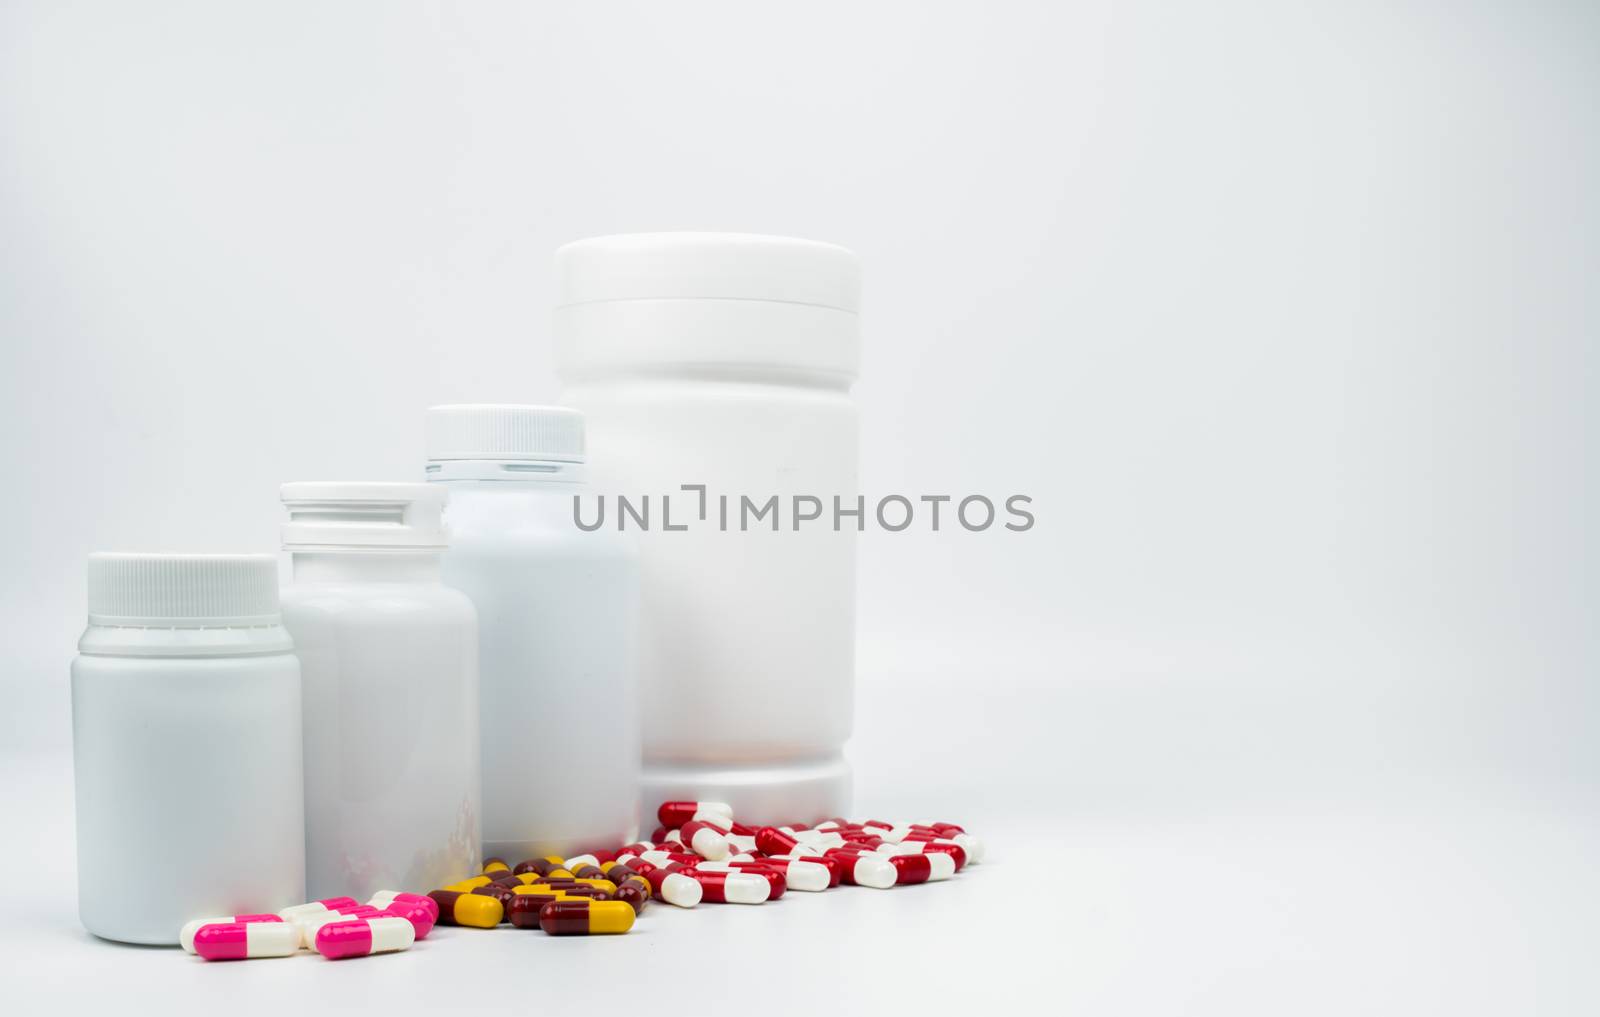 Antibiotic capsules pills and plastic bottle with blank label isolated on white background with copy space. Drug resistance concept. Antibiotics drug use with reasonable and global healthcare concept.